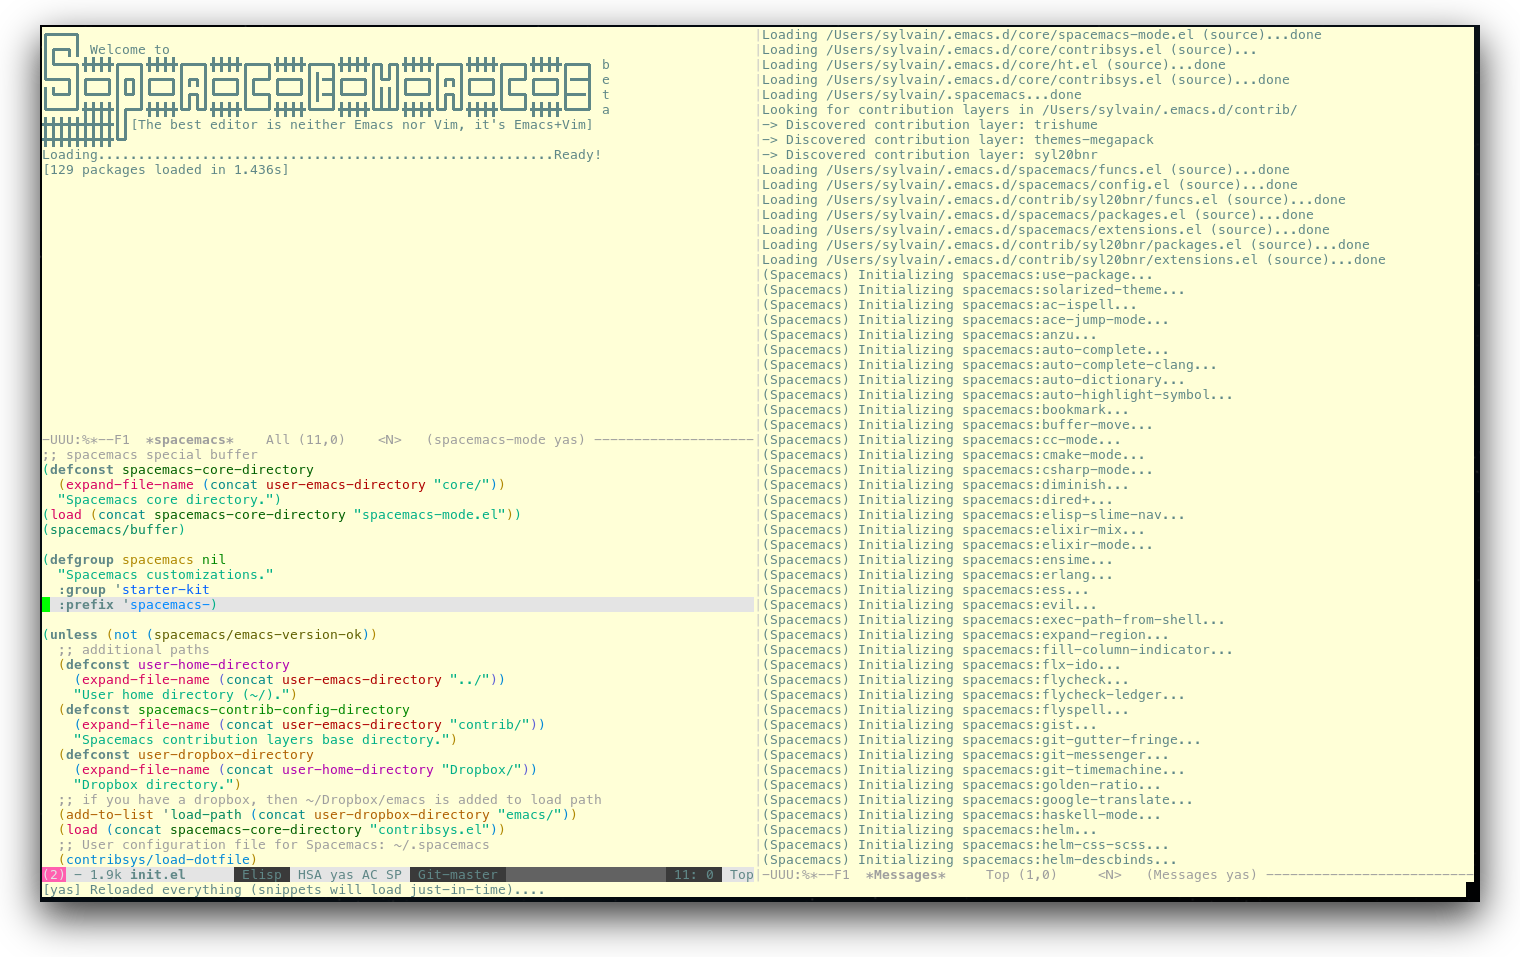 /TakeV/spacemacs/media/commit/d1bb779340fadfe5f1d4cacd716d3d658e4bea76/doc/img/spacemacs-urxvt.png